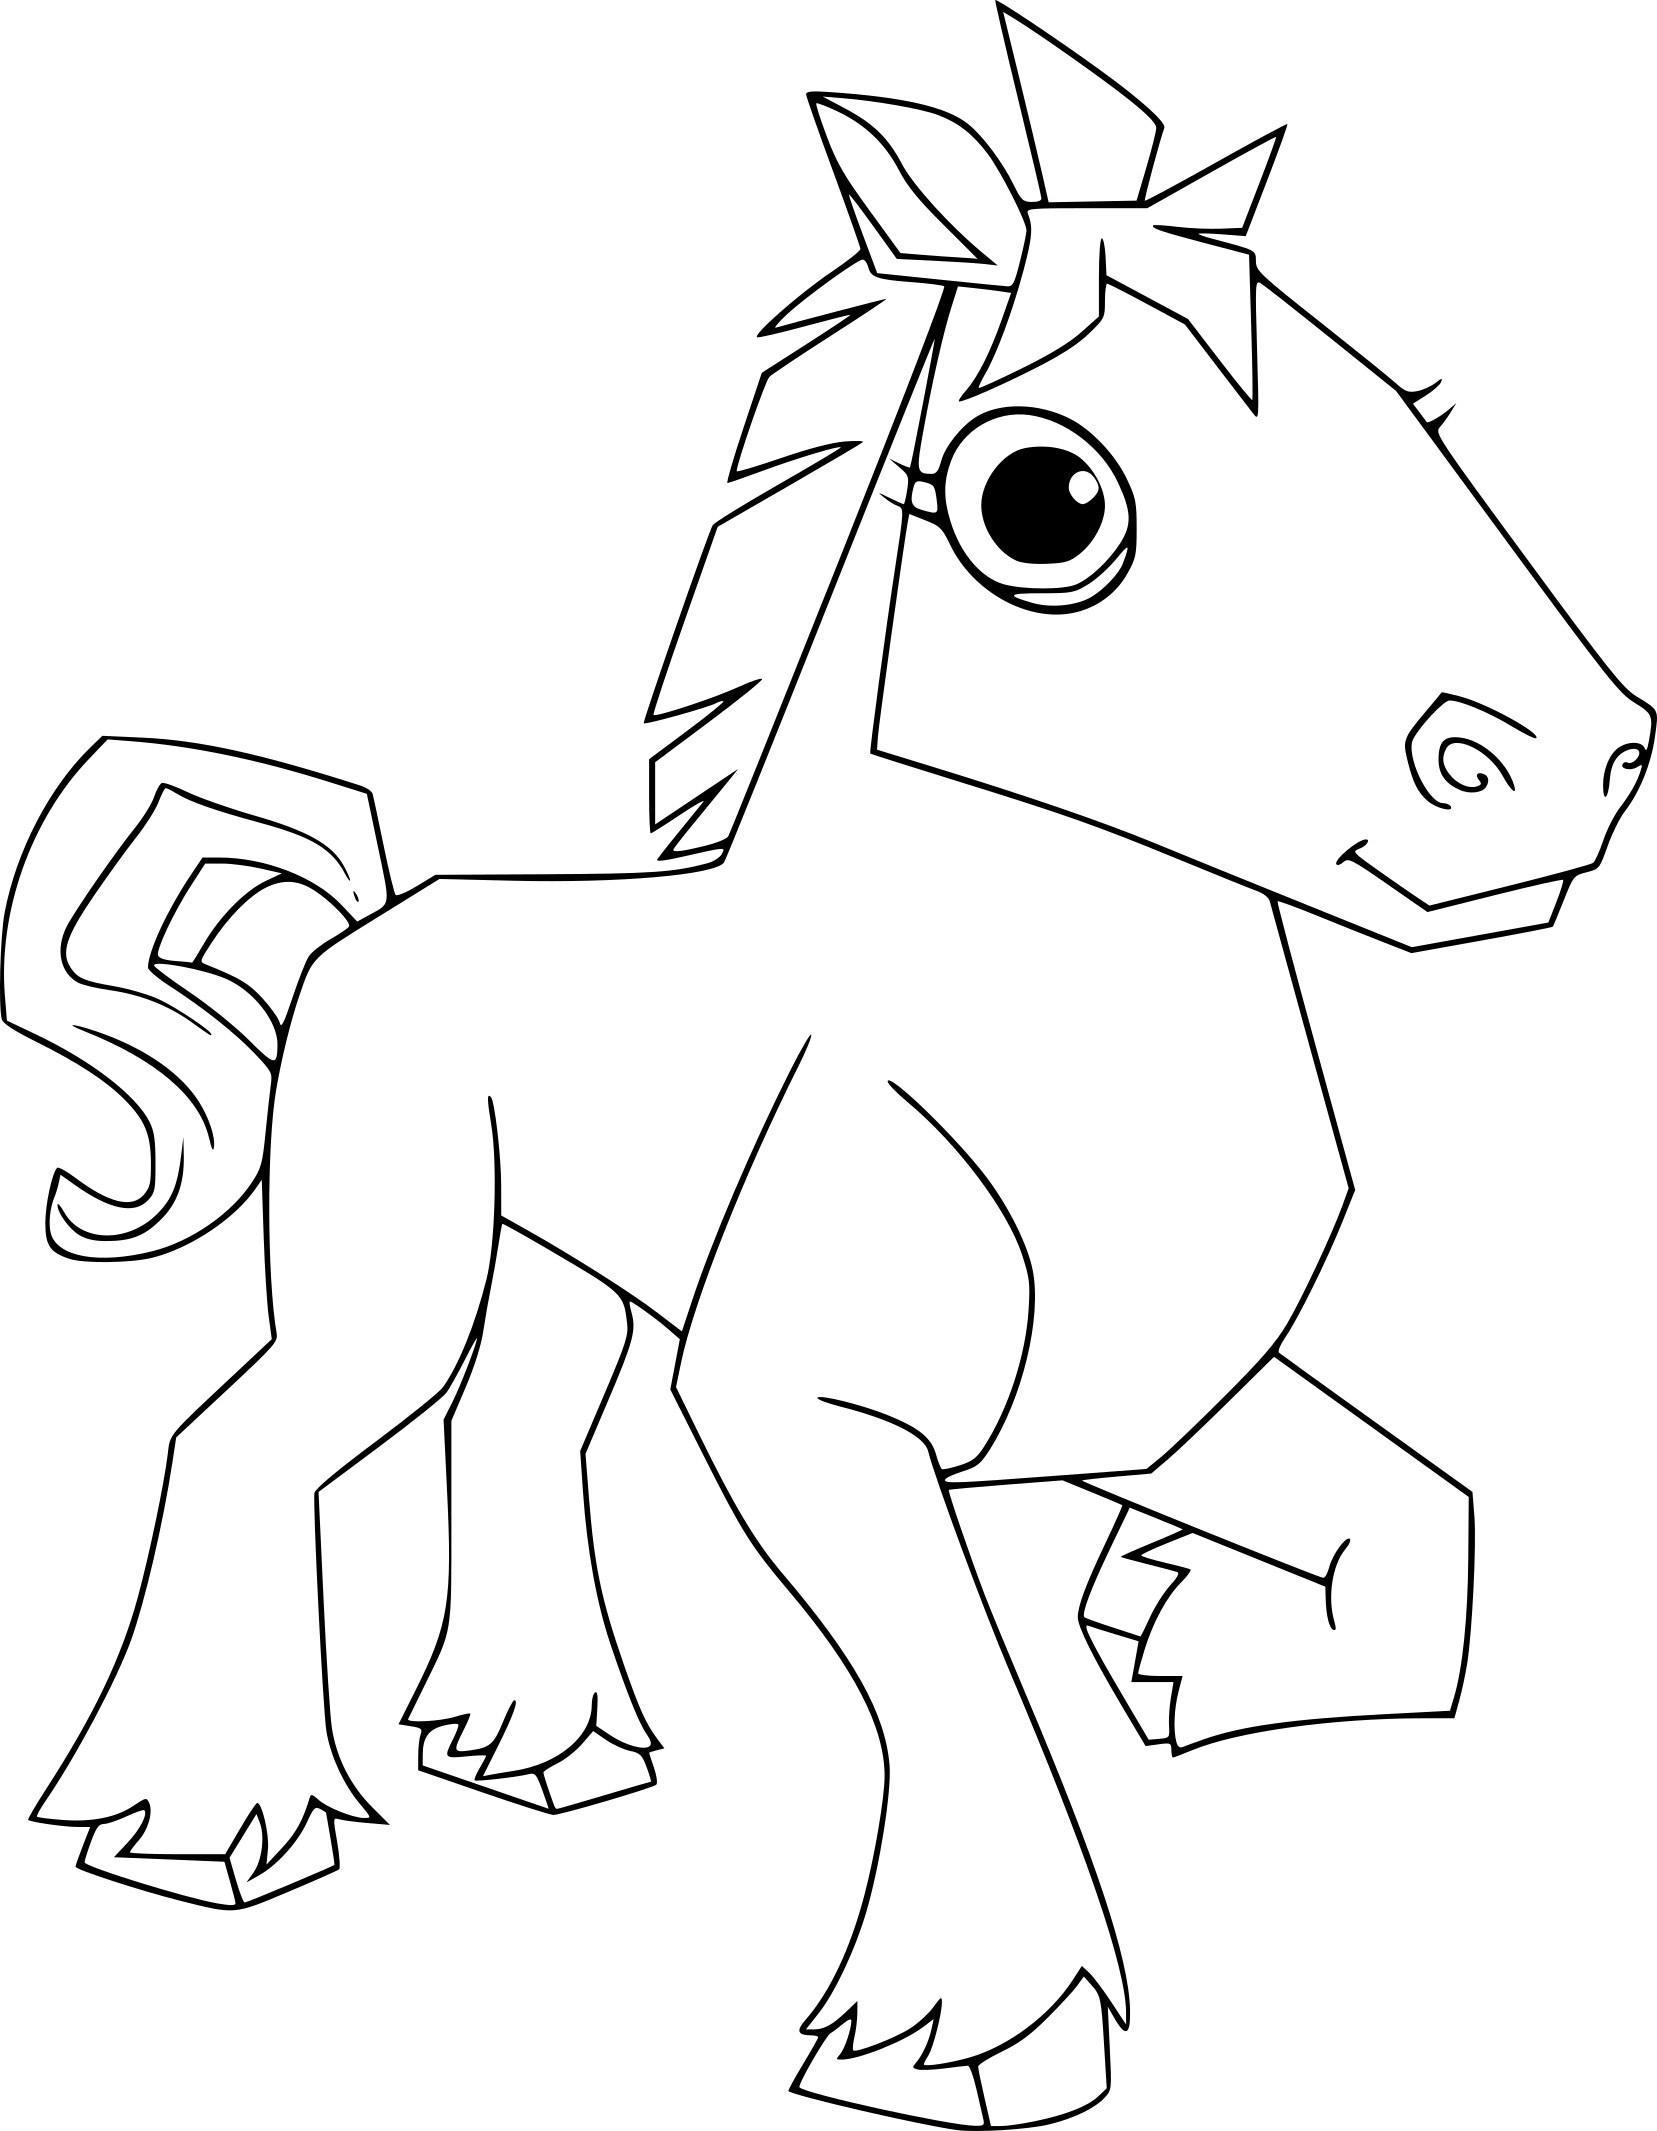 Animal Jam Horse coloring page